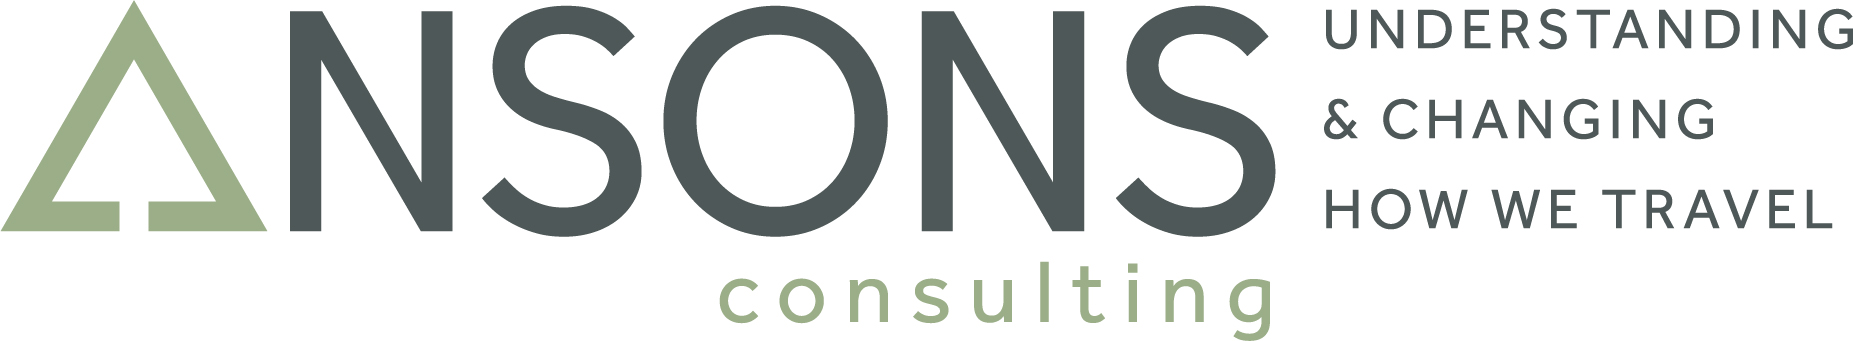 logo for Ansons Consulting Ltd